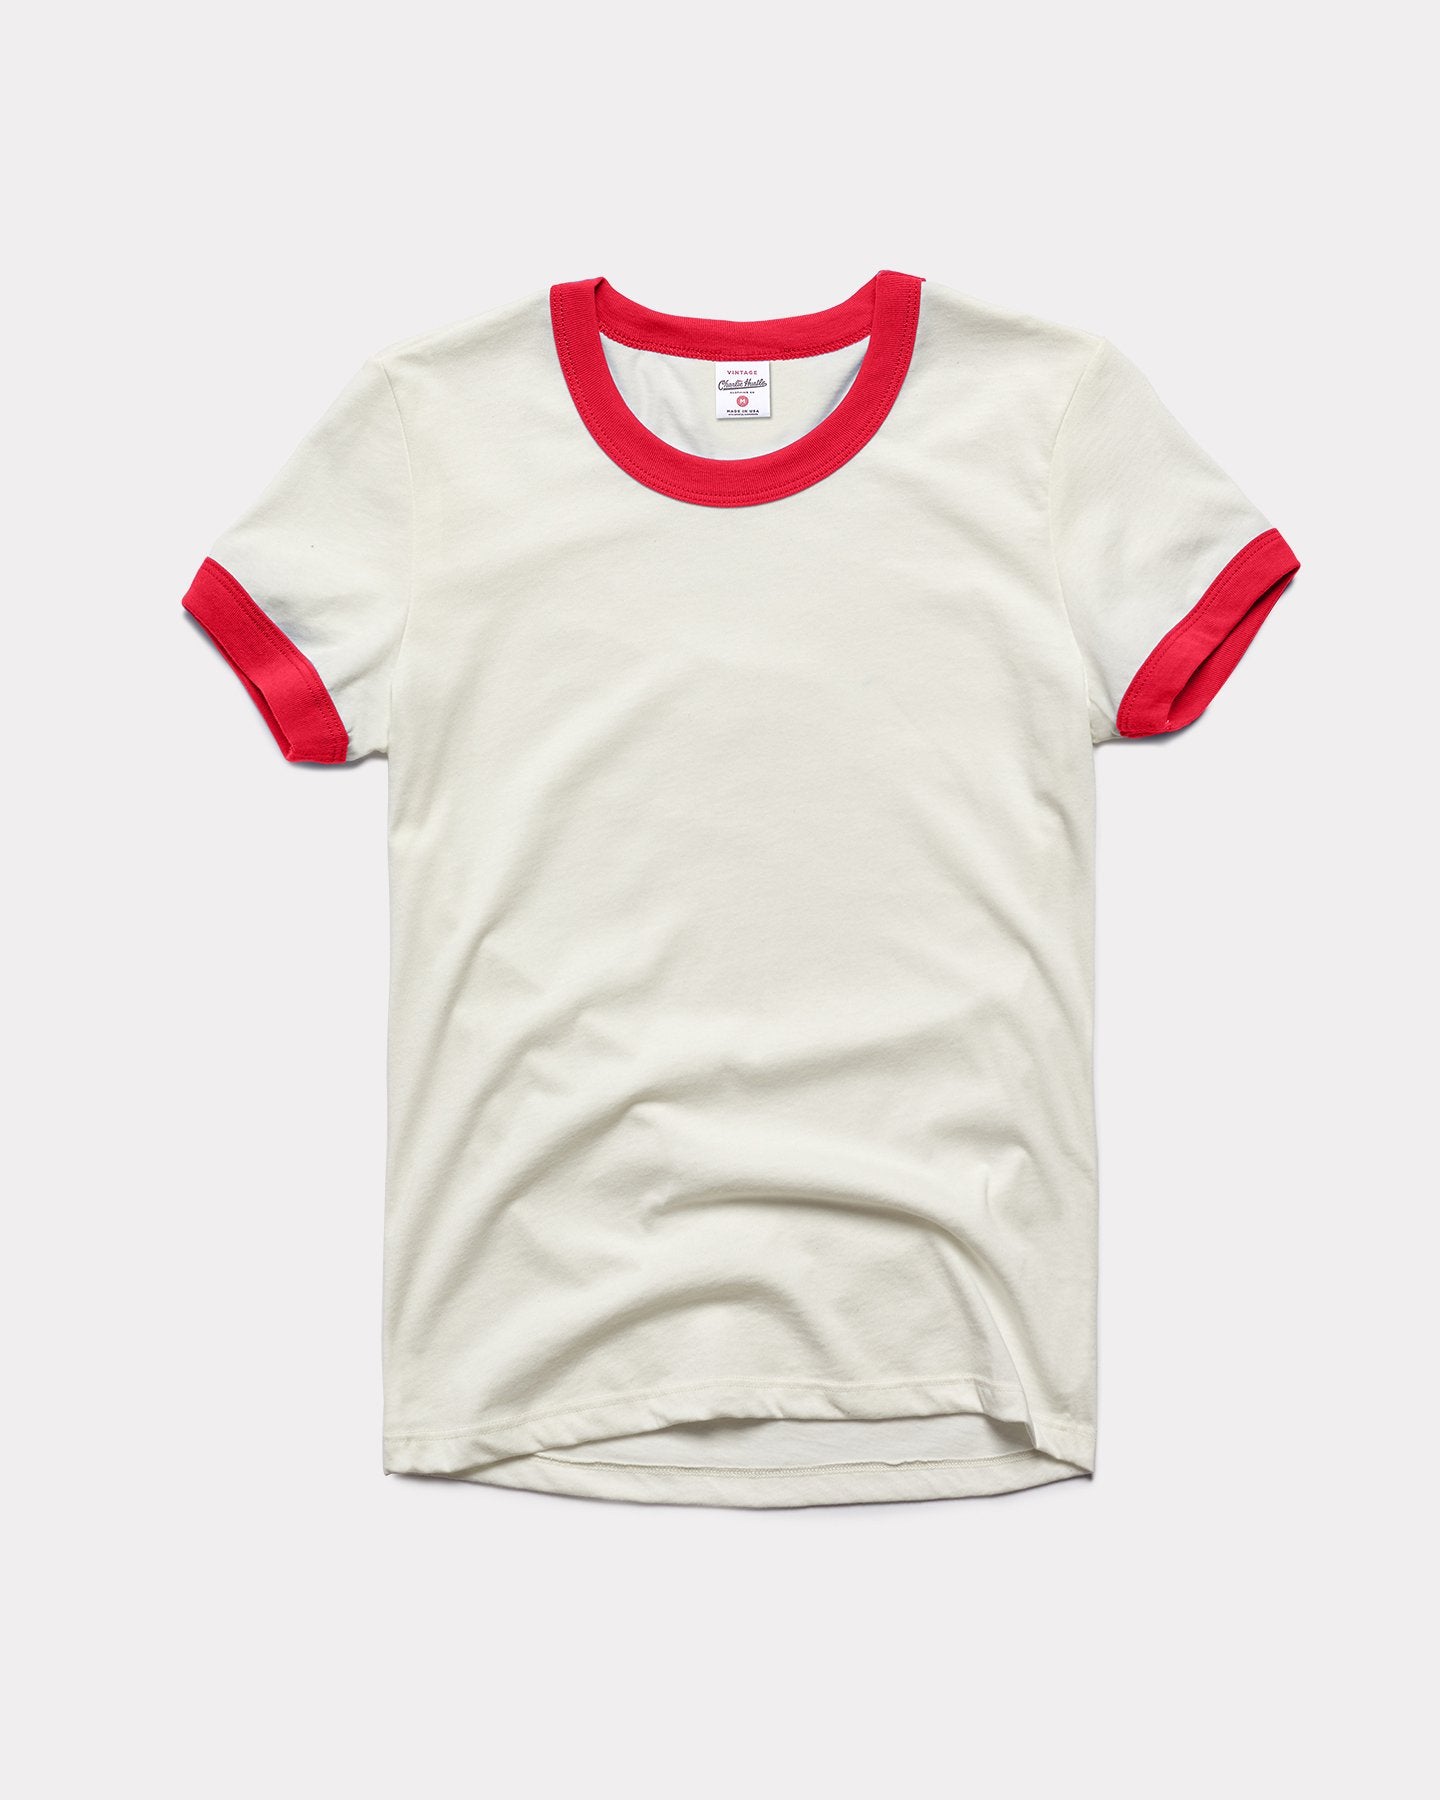 red and white ringer tee